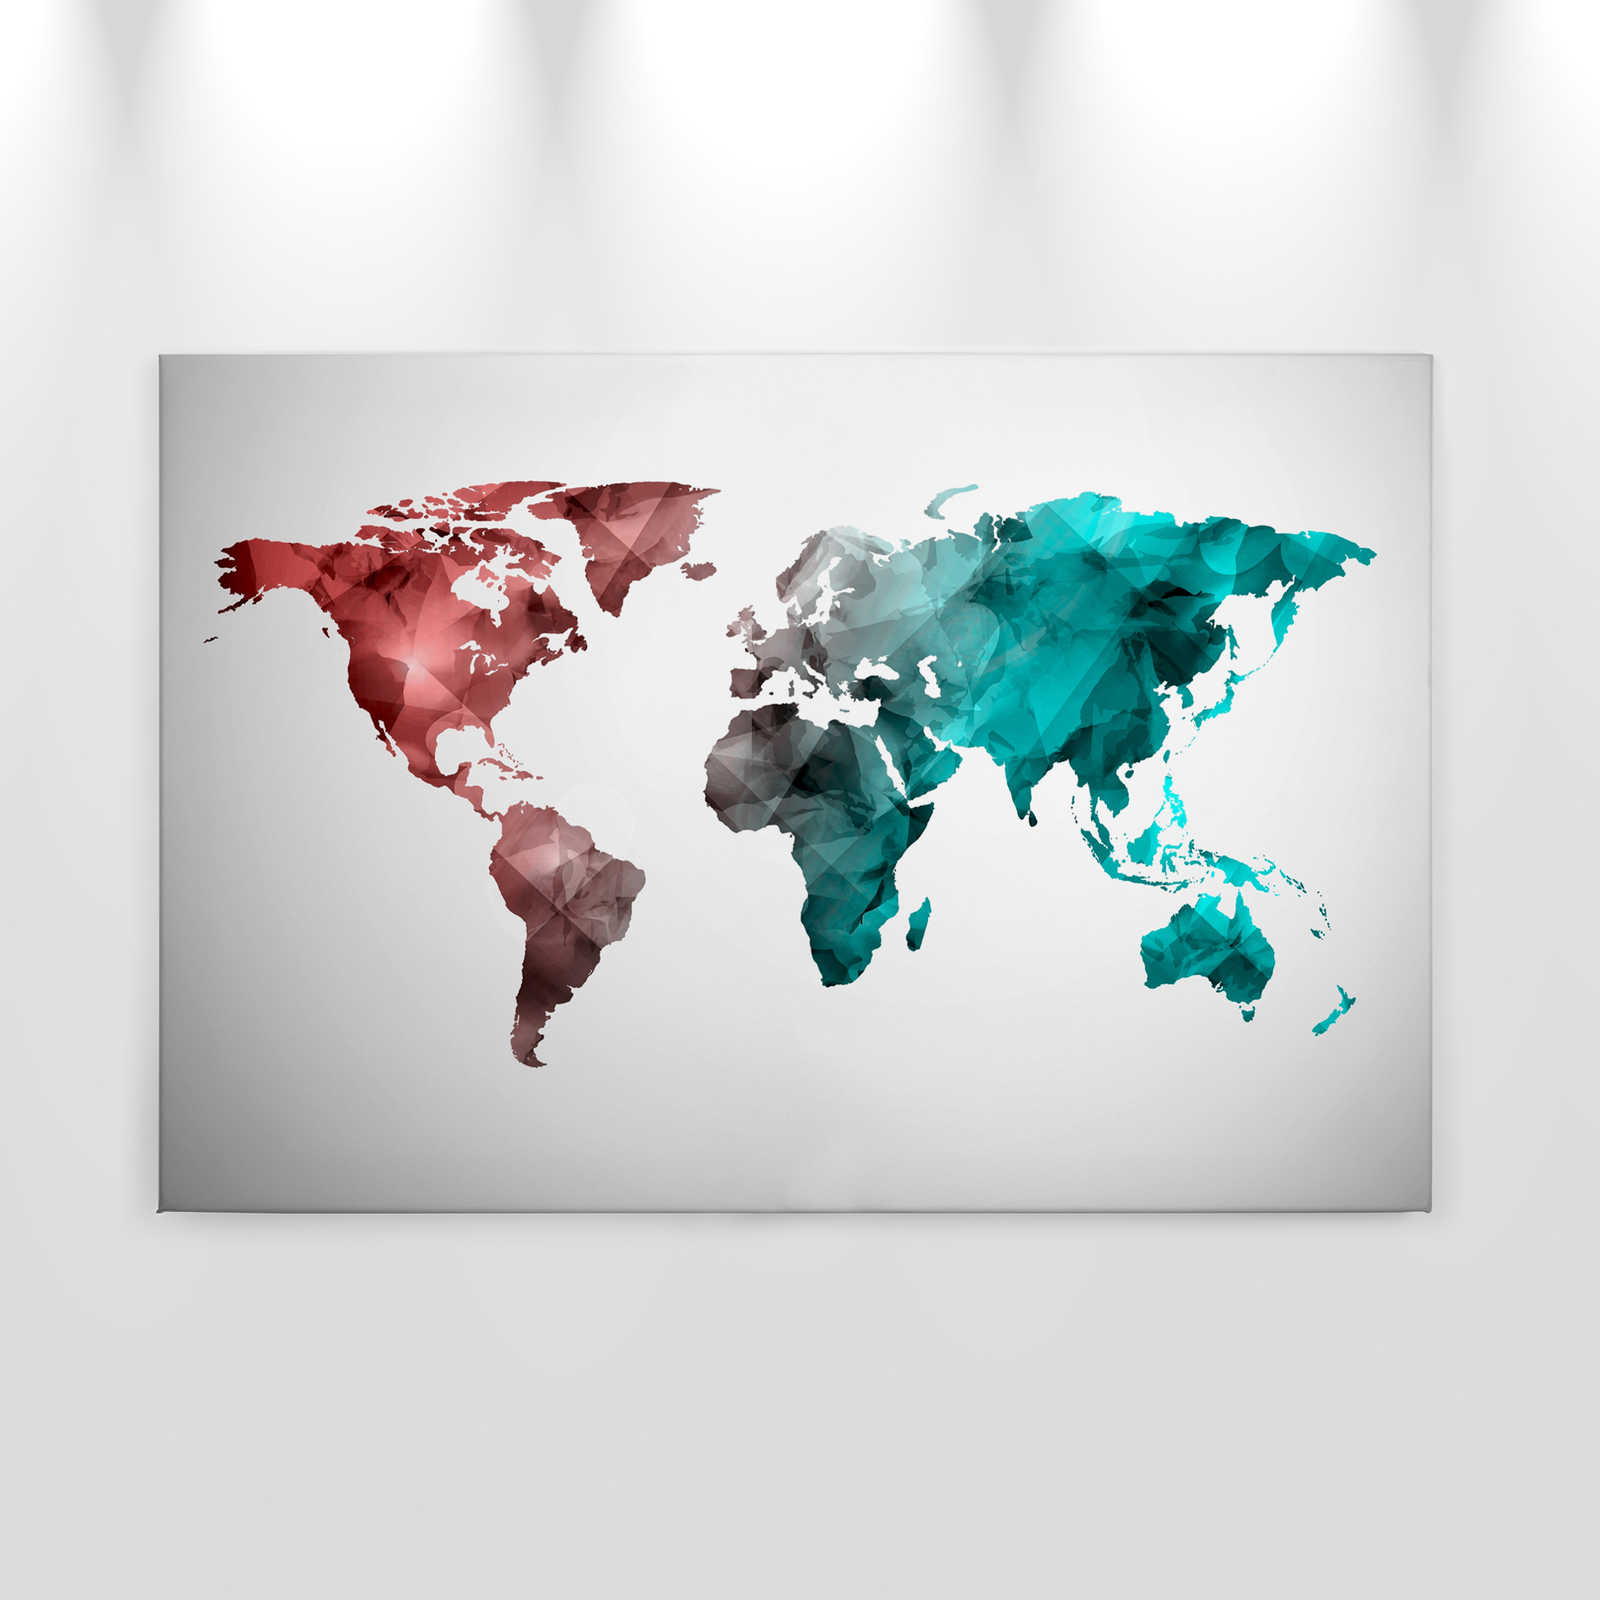             Canvas with world map made of graphic elements | WorldGrafic 2 - 0.90 m x 0.60 m
        